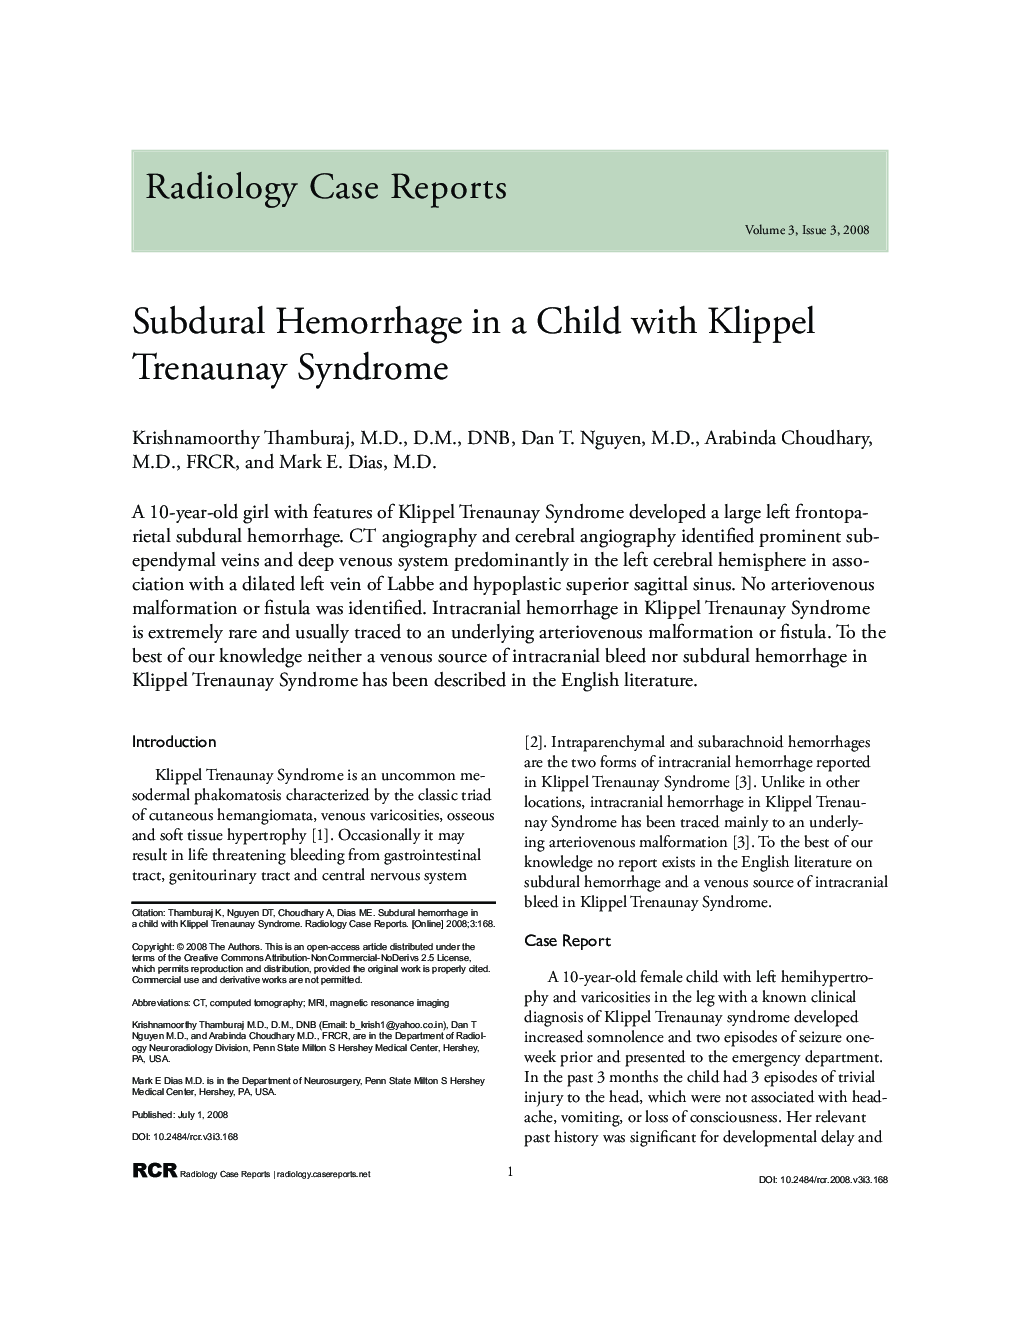 Subdural Hemorrhage in a Child with Klippel Trenaunay Syndrome